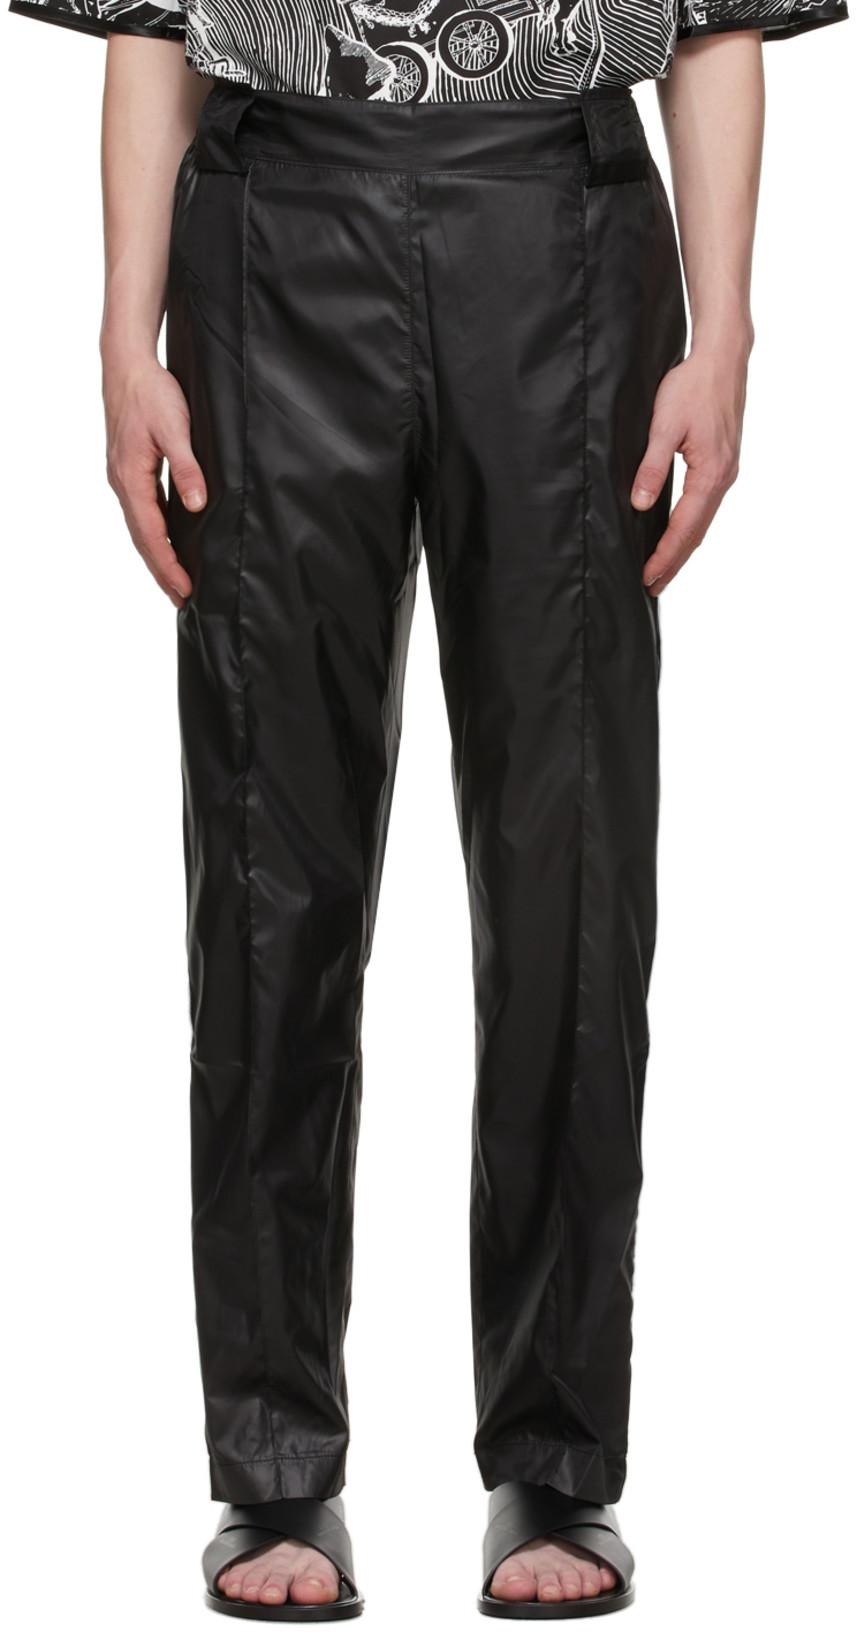 Black & White Satin Army Trousers by BORAMY VIGUIER